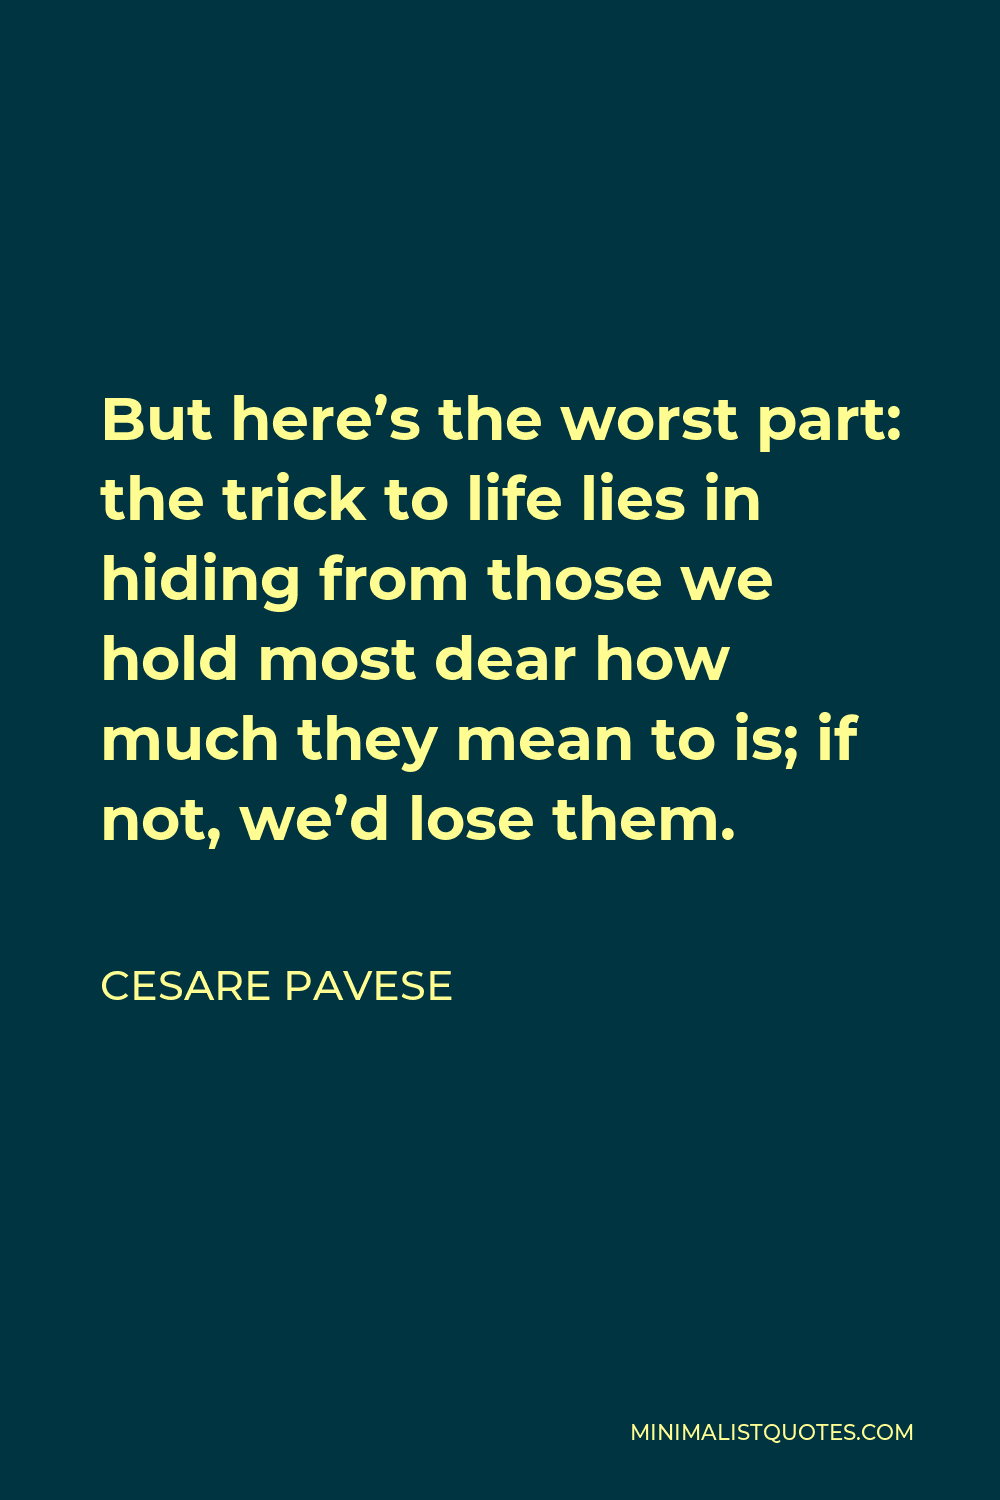 Cesare Pavese Quote - But here’s the worst part: the trick to life lies in hiding from those we hold most dear how much they mean to is; if not, we’d lose them.